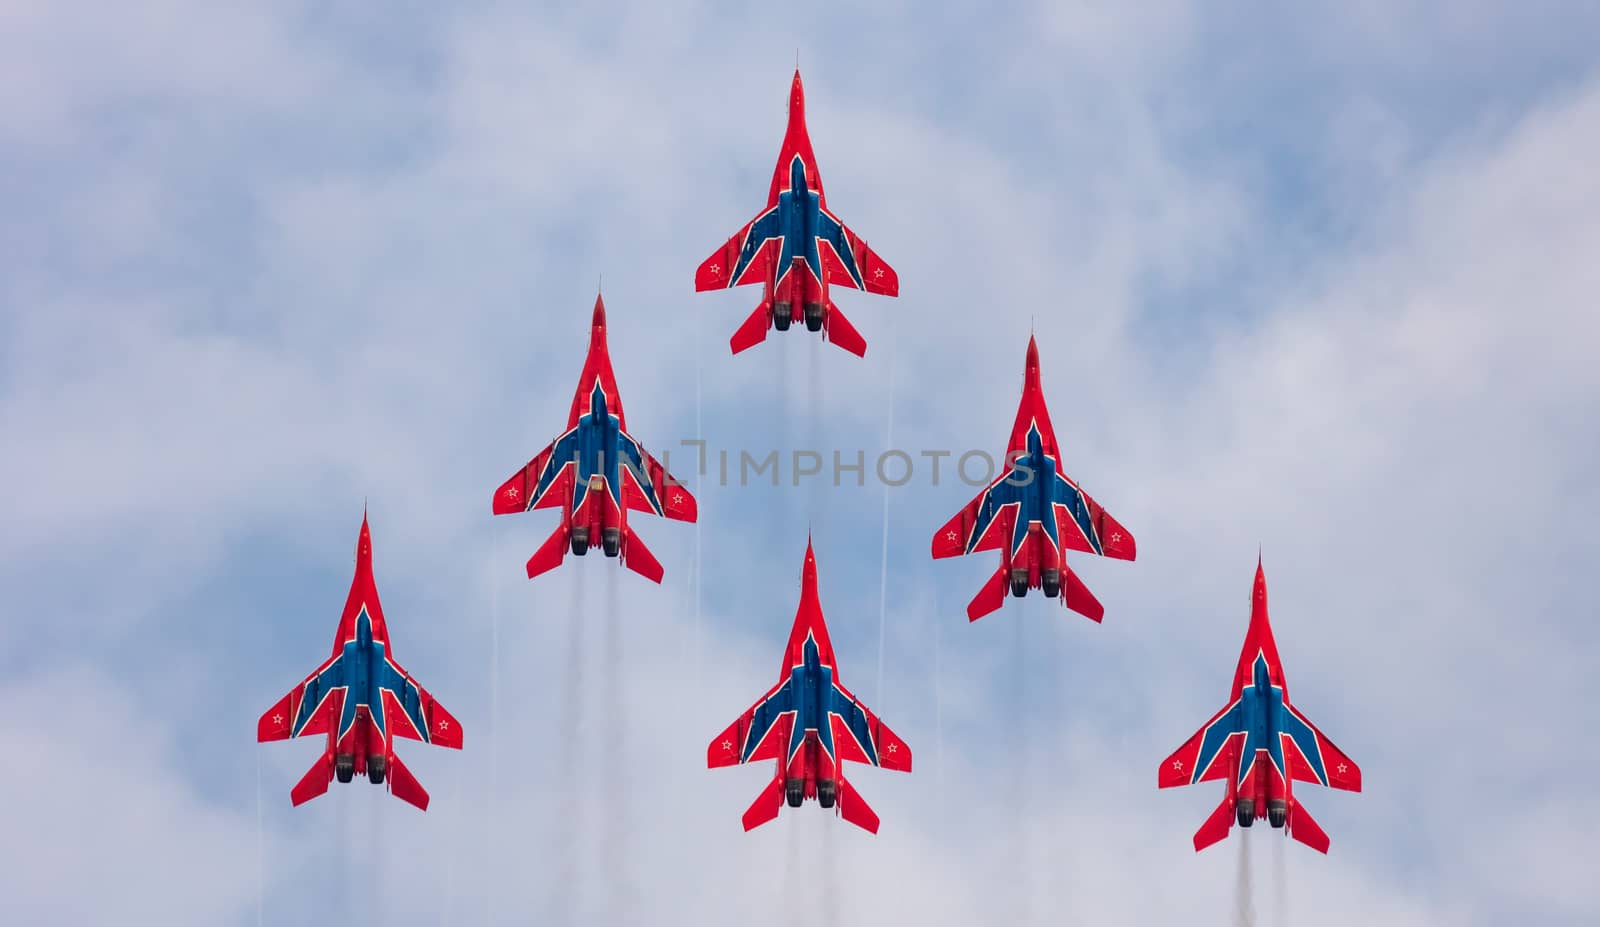 Barnaul, Russia - September 19, 2020: A shot of Strizhi MiG-29 fighter jet squadron performing vertical ascending during an aeroshow. Blue cloudy sky as a background.